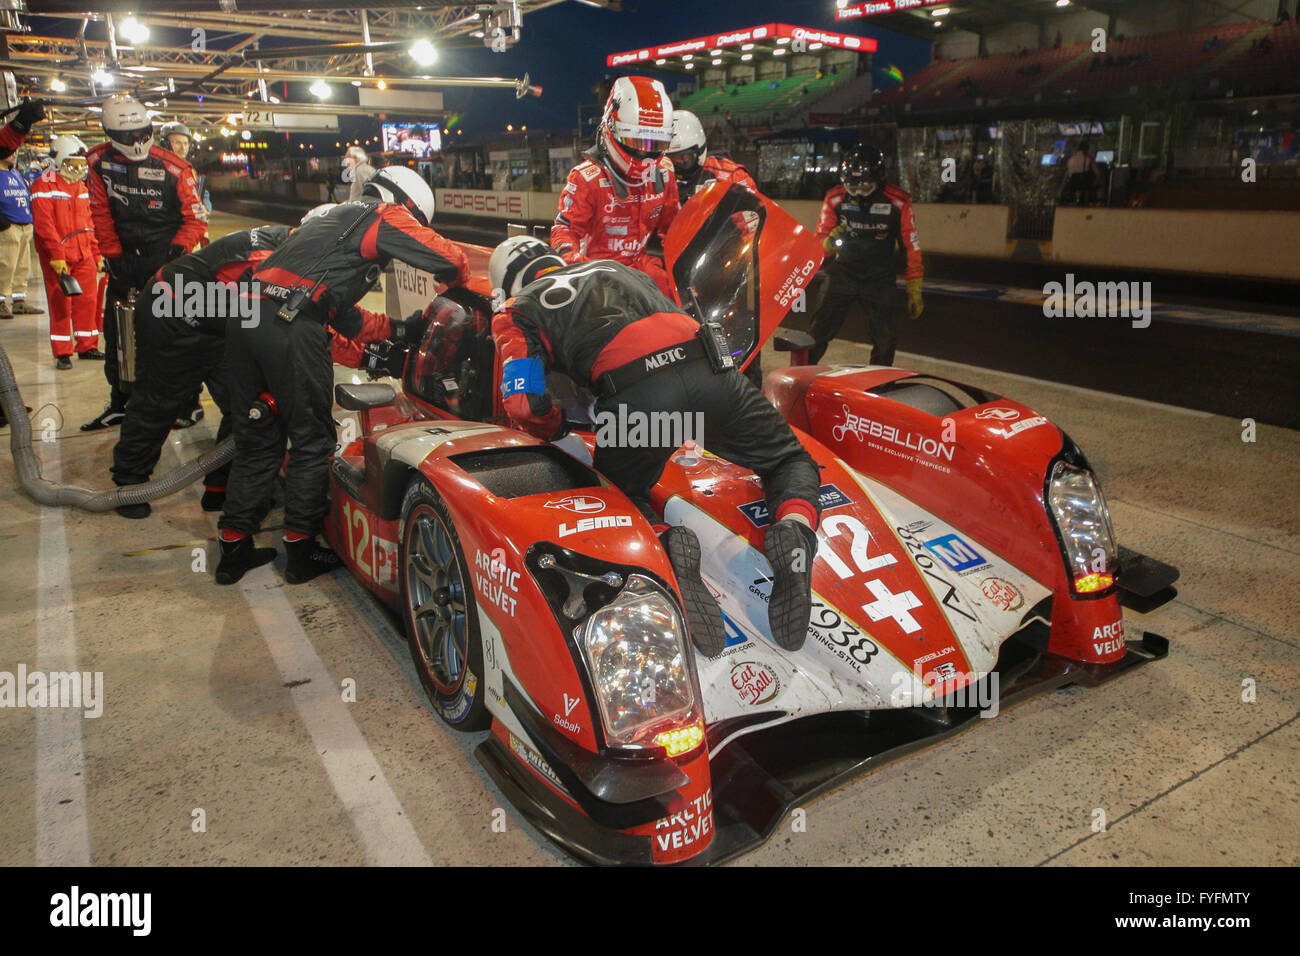 Lola B12 60-Toyota, No. 12, LM P1-L, of team Rebellion Racing, Switzerland,  in the pit lane during the 24 hours of Le Mans Stock Photo - Alamy